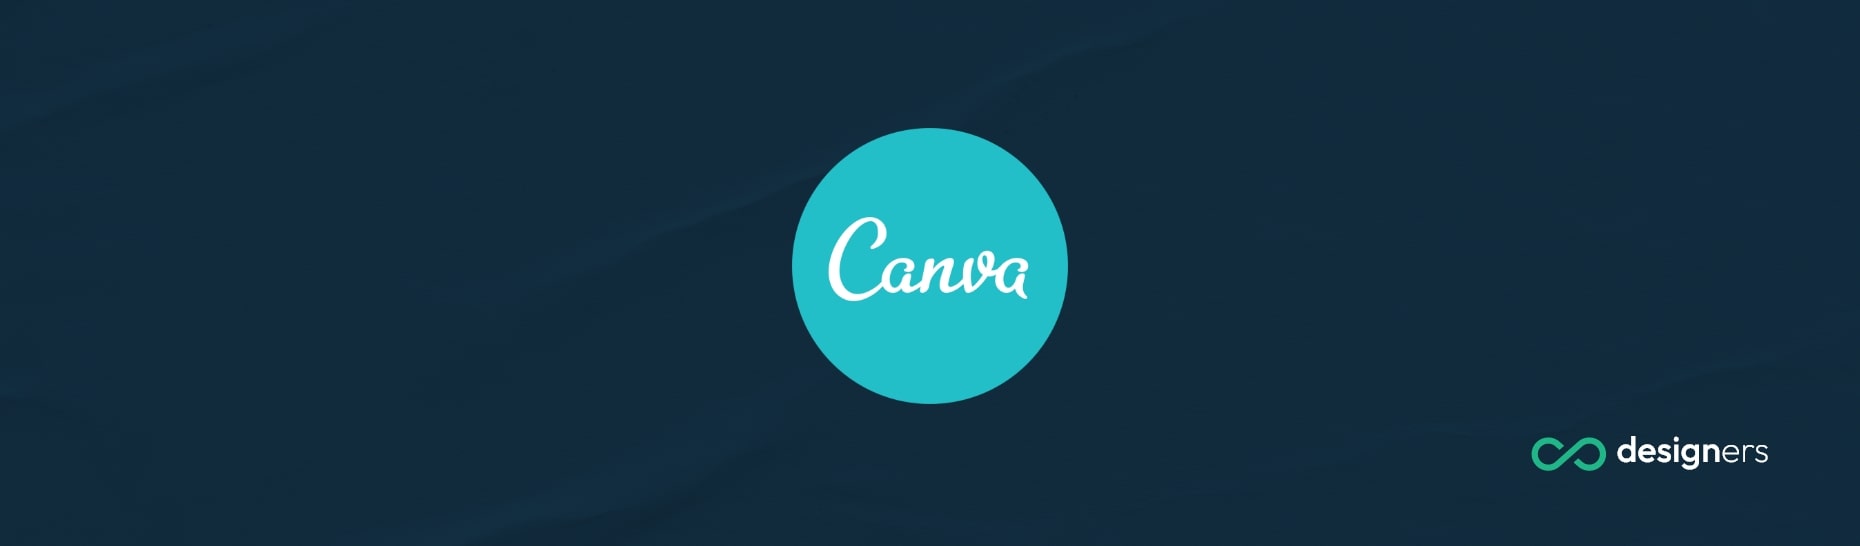 What Font Is Sabon in Canva?